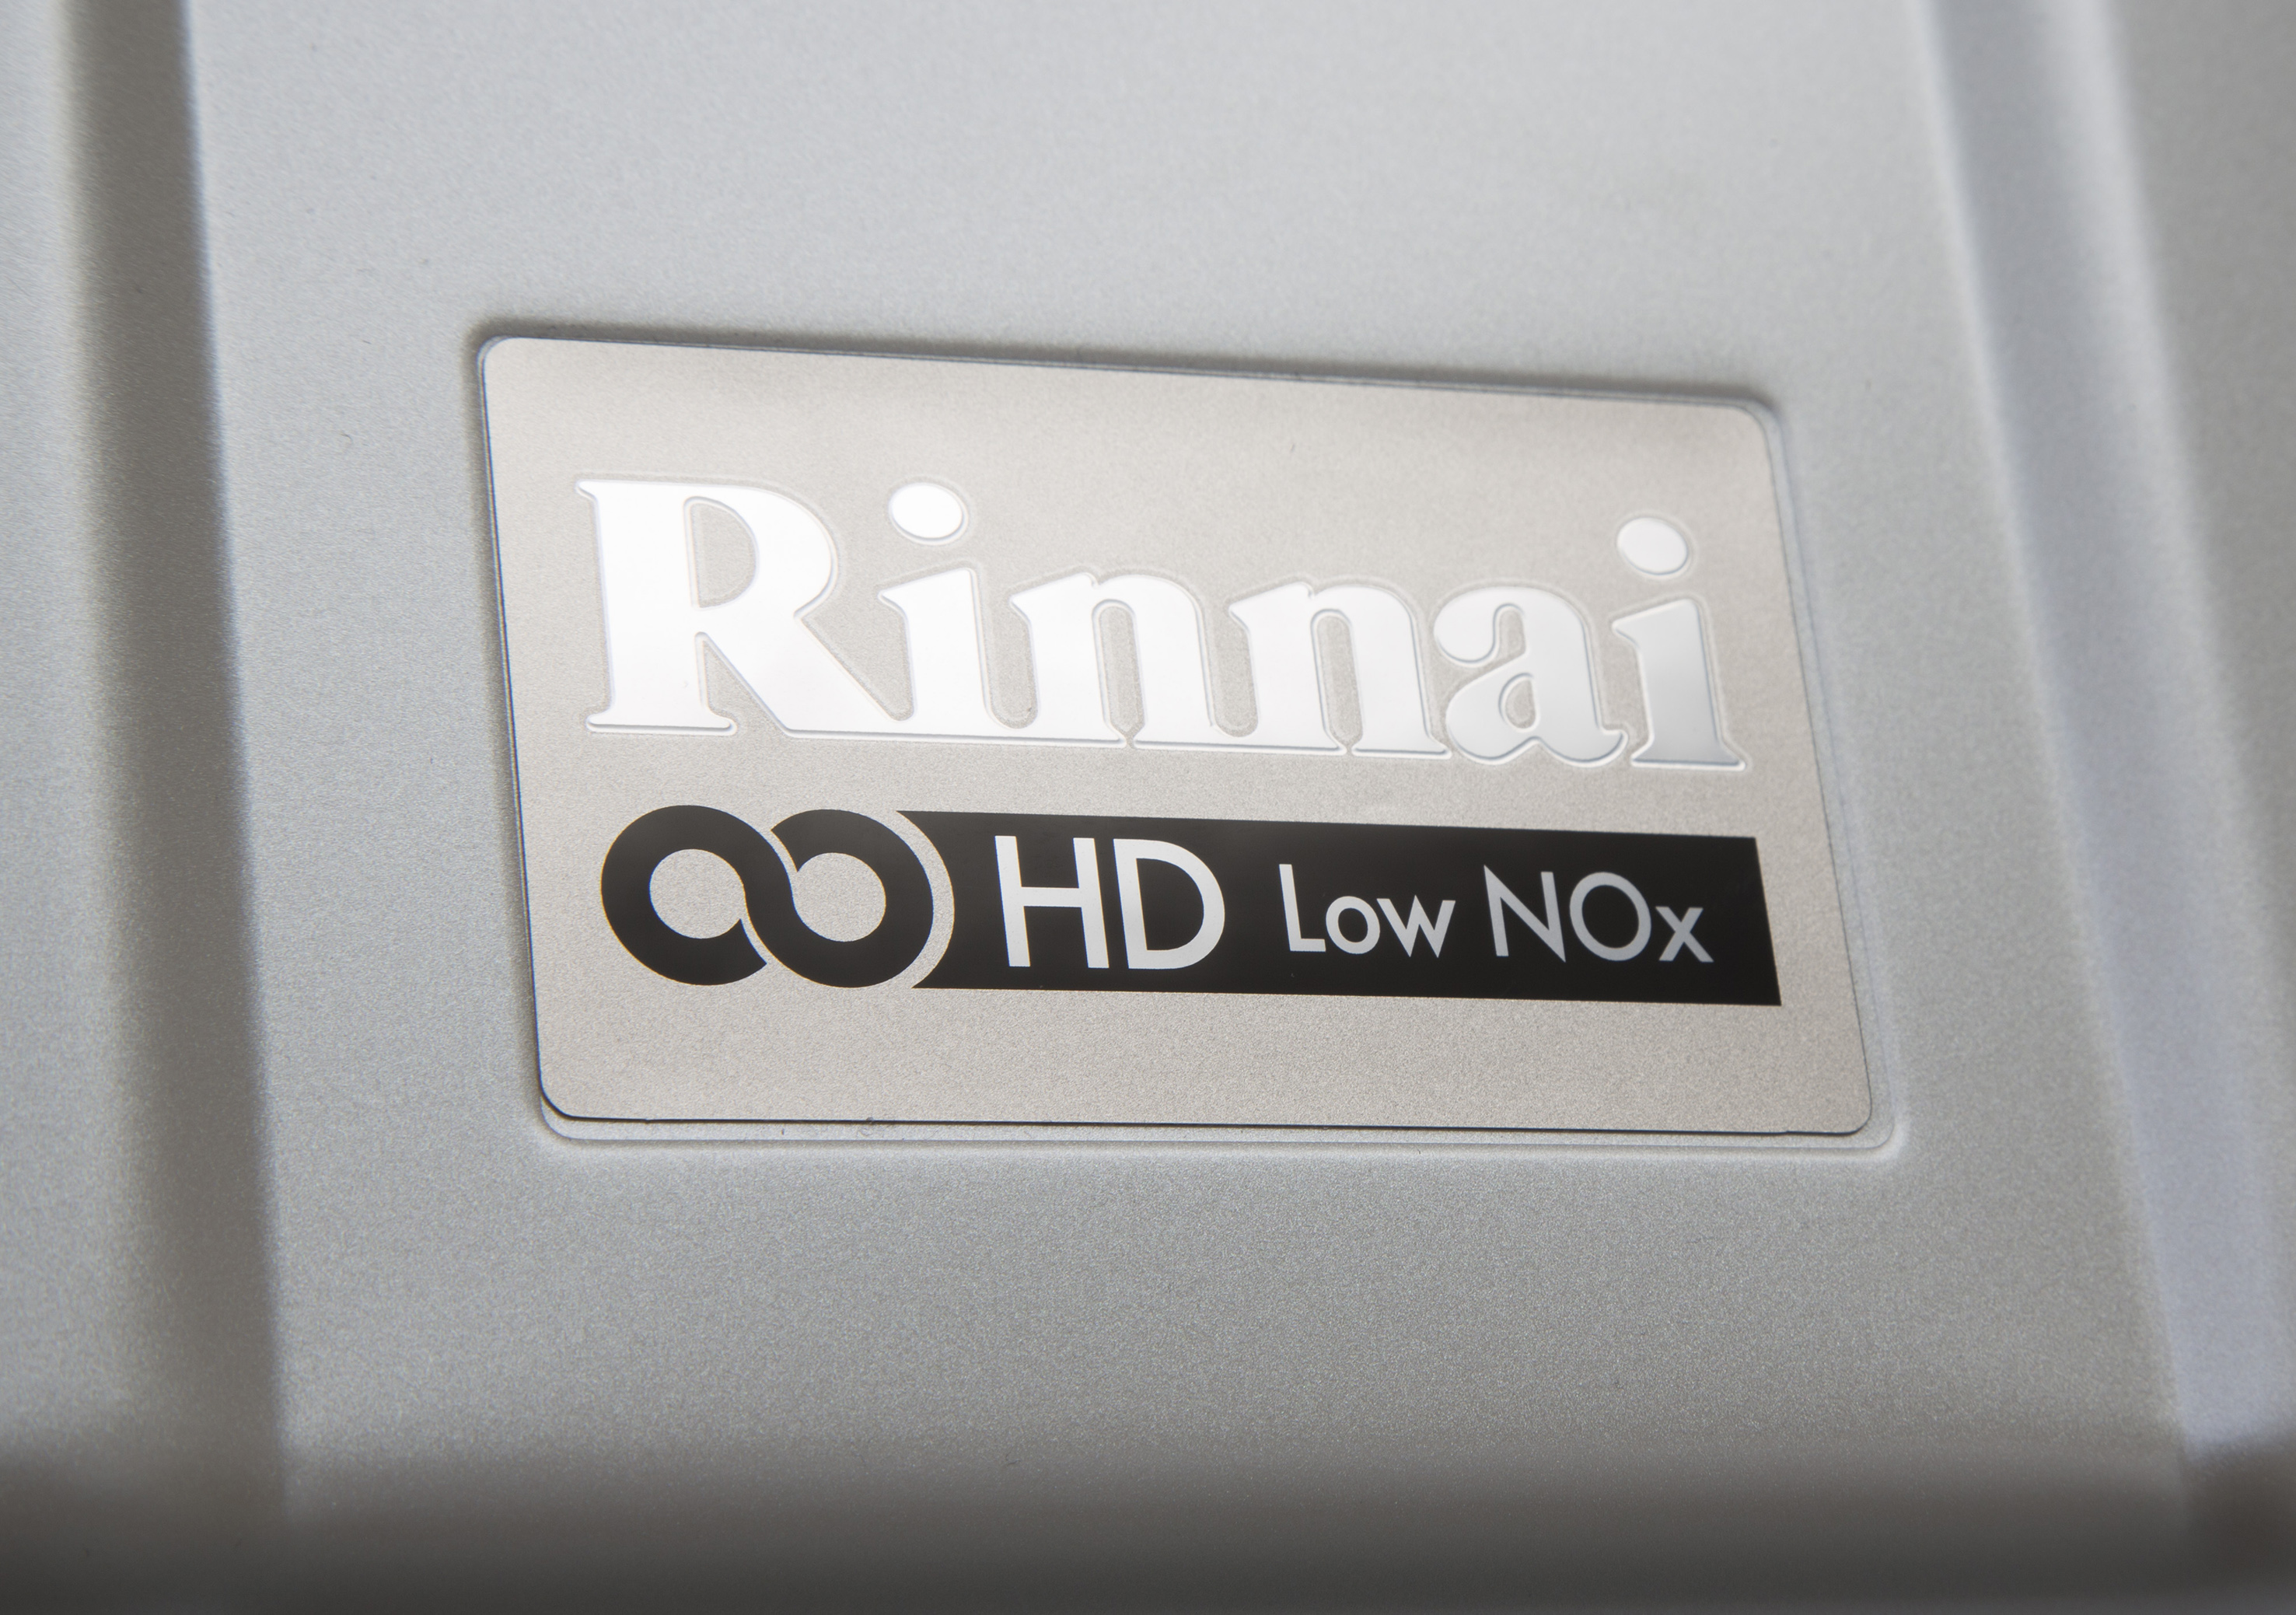 Rinnai’s energy efficient multipoint water heater – never run out of hot water again! @rinnai_uk